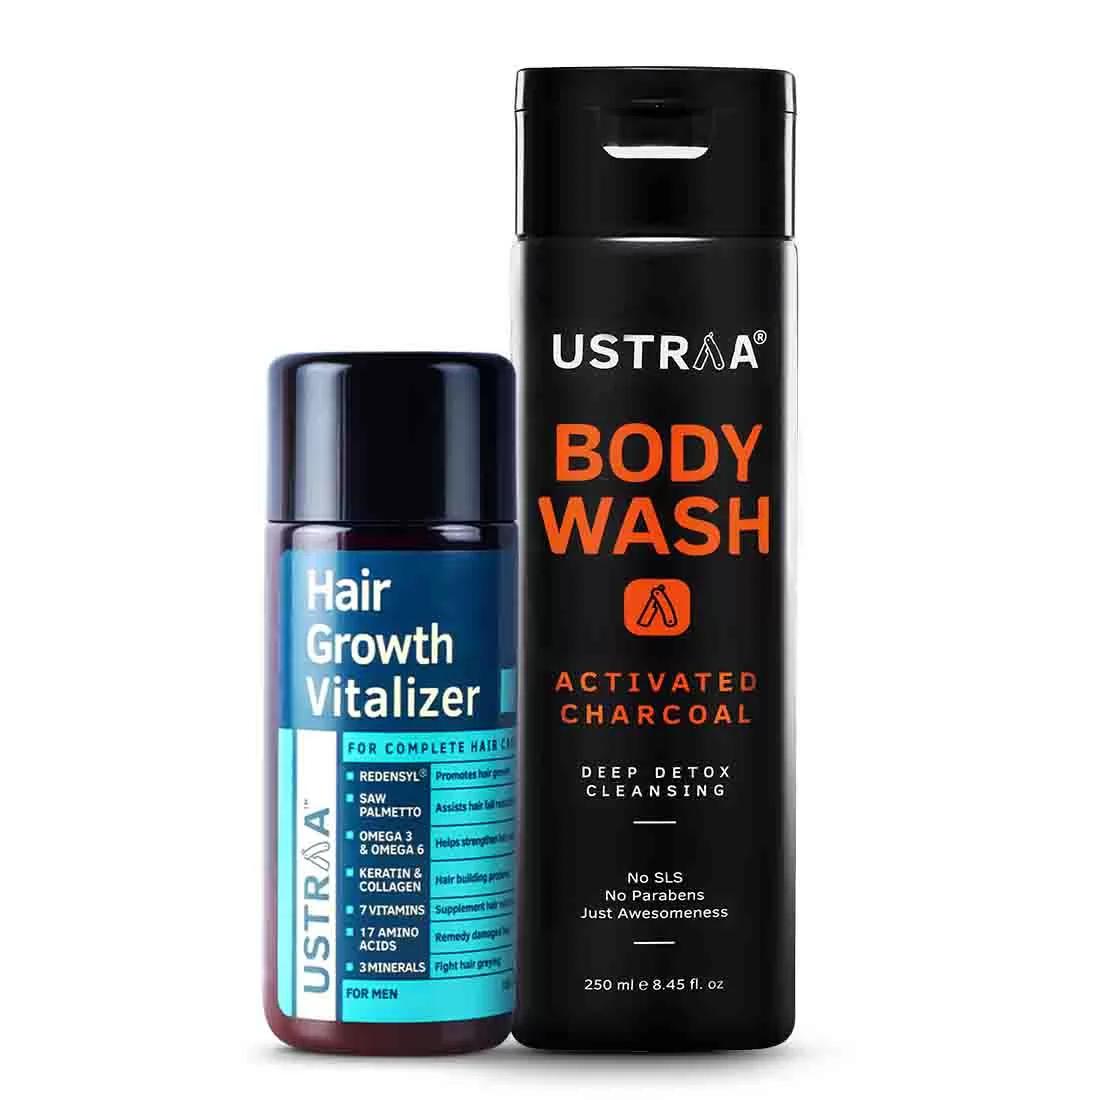 Hair Growth Vitalizer & Body Wash- Activated Charcoal